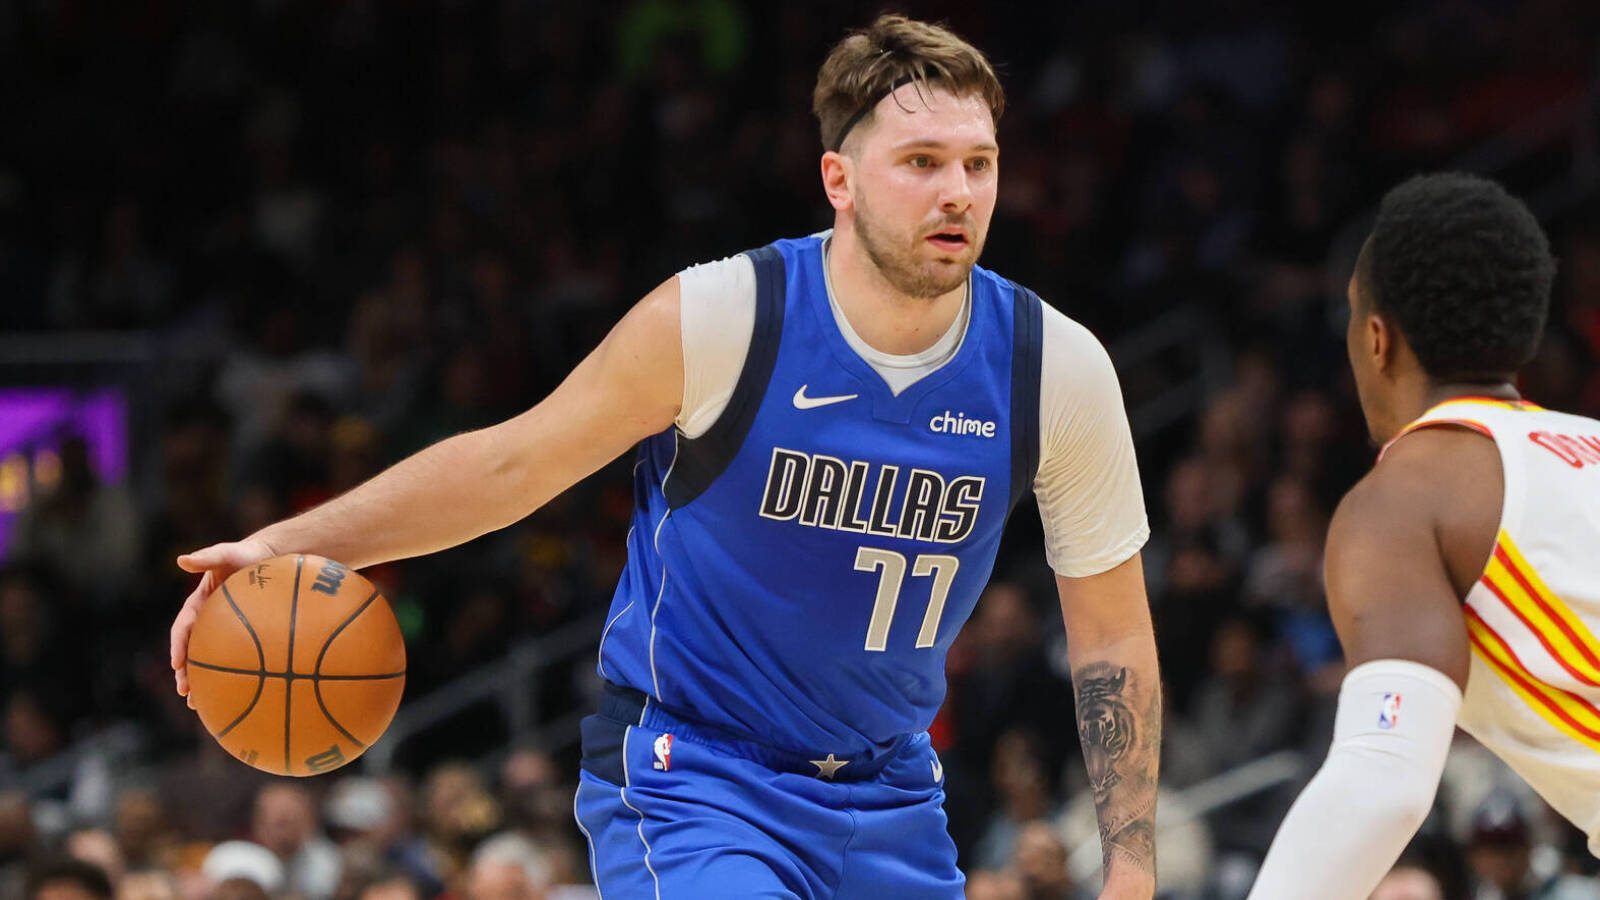 Mavericks star Luka Doncic pays homage to Wilt Chamberlain following 73-point game